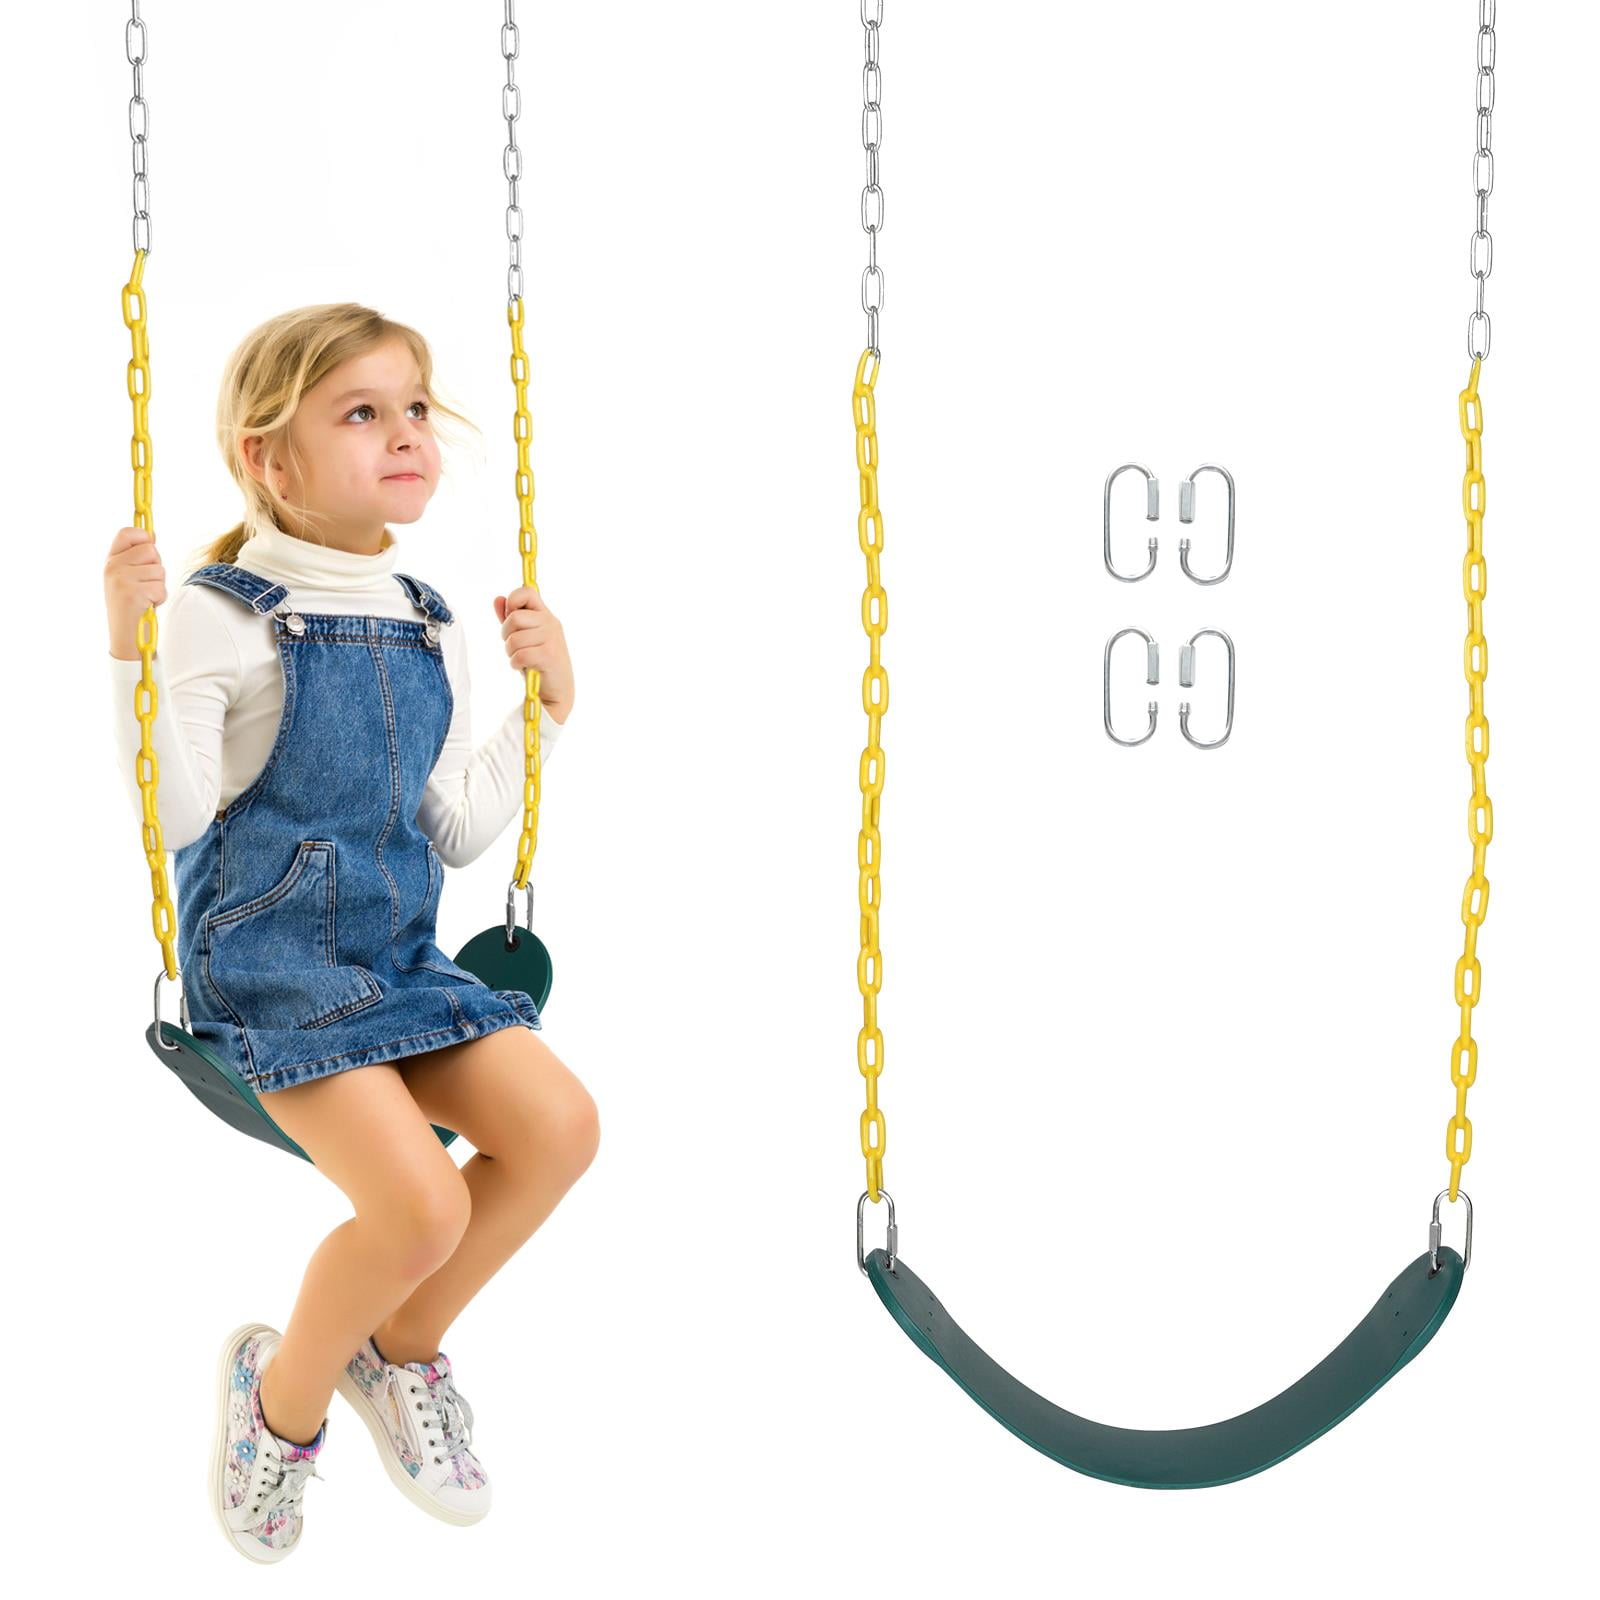 Swings Seat Iron Chain Playground Swing Set Accessories Replacement Green 